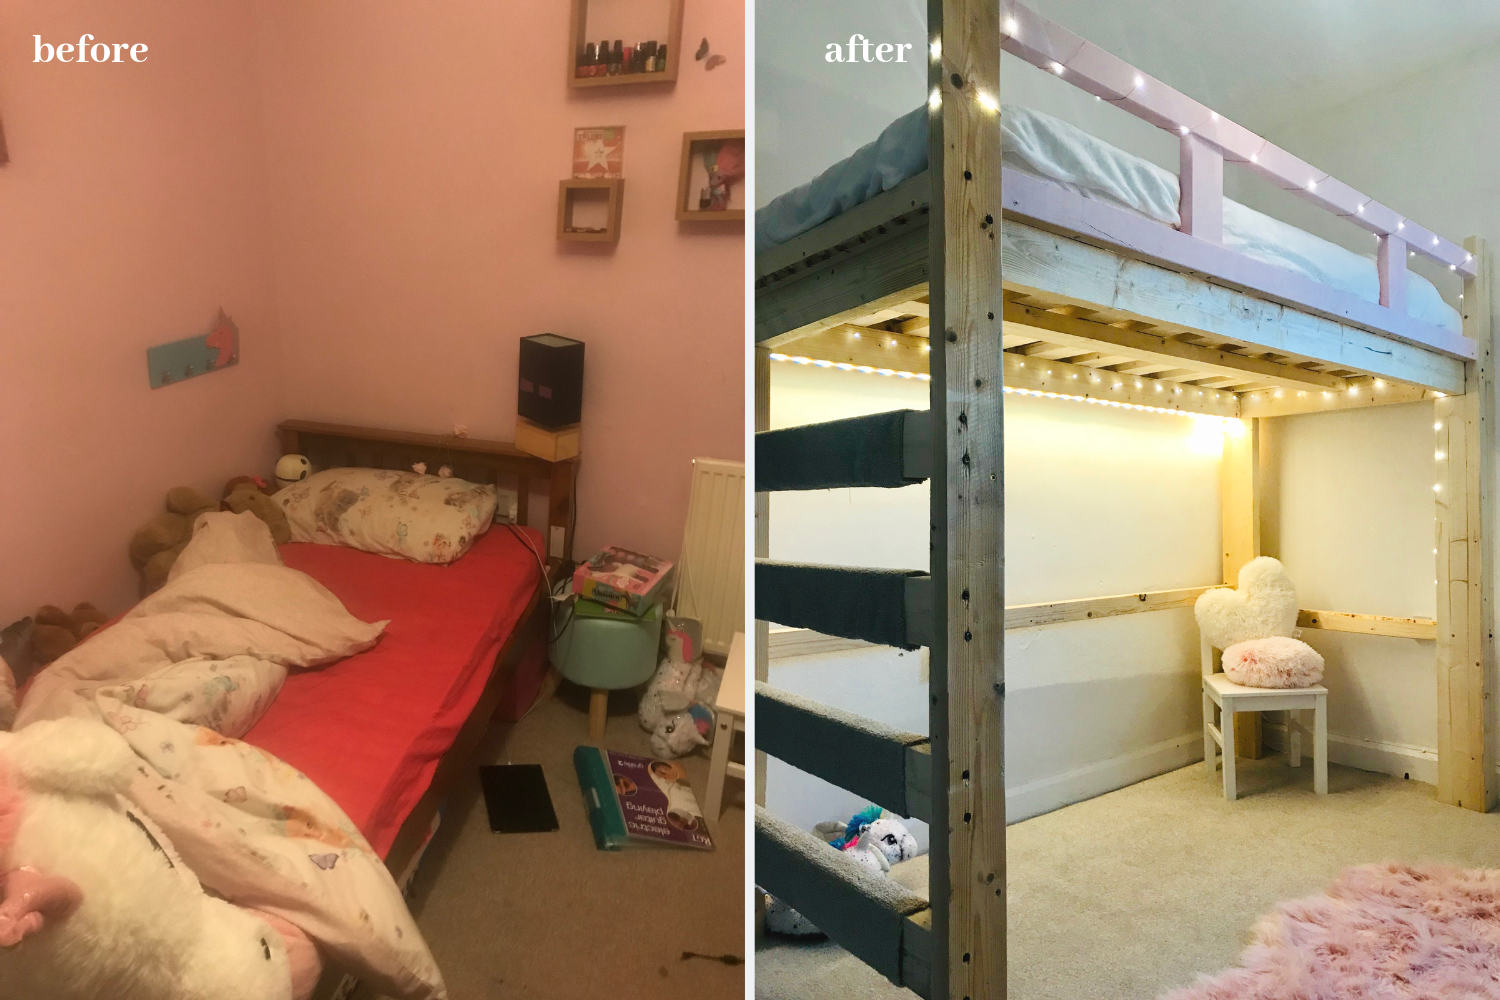 Stunning Bedroom Makeover You Can Do On A Really Small Budget - Including Embarrassing Before Pics | DIY Home decor | Bedroom Makeover Ideas | Small bedroom ideas | DIY bed | DIY projects | Home decor on a budget | Via https://themummyfront.com #themummyfront #bedroommakeover #bedroommakeoveronabudget #bedroommakeoverideas #homedecoronabudget #diyhomedecor #bedroombeforeandafter